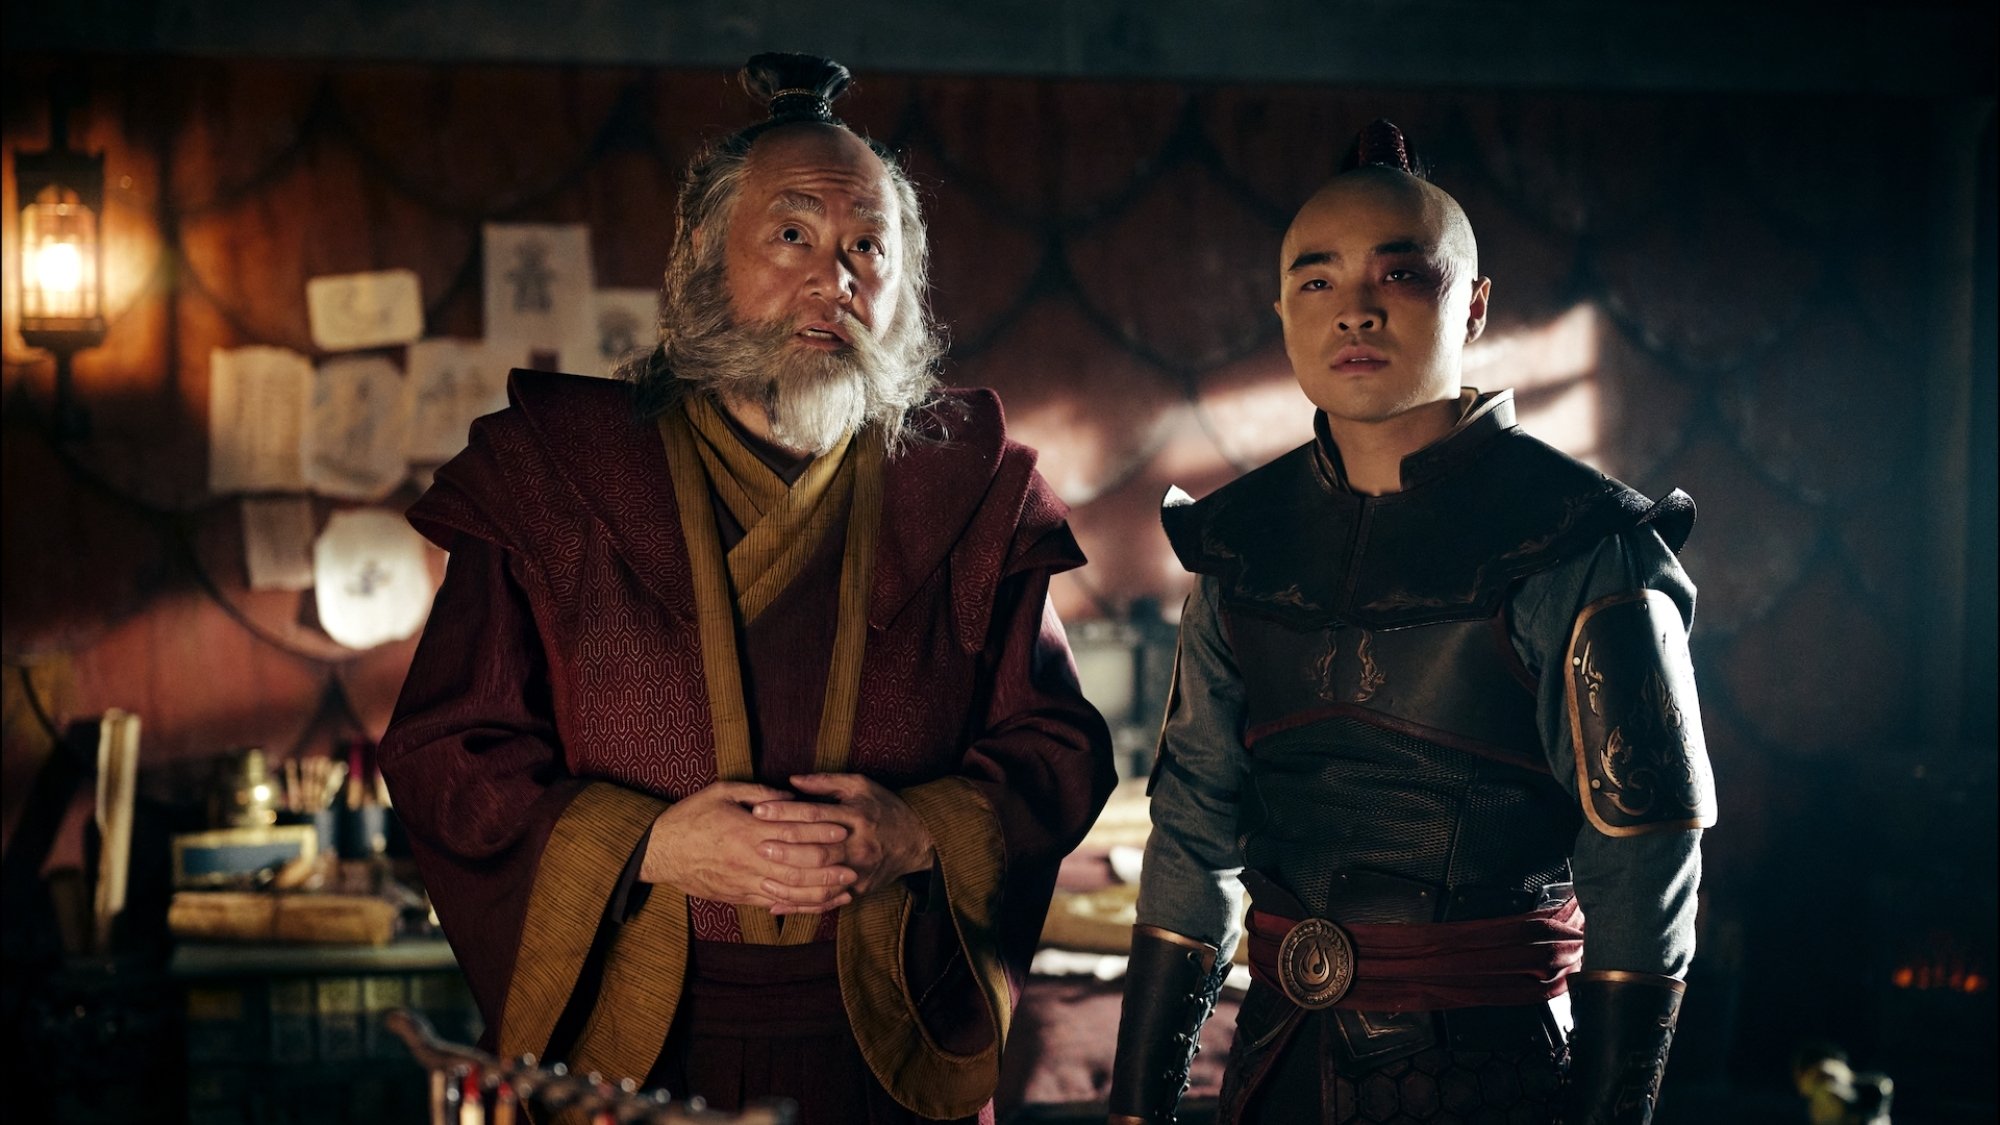 Paul Sun-Hyung Lee as Iroh and Dallas James Liu as Prince Zuko in Netflix's "Avatar: The Last Airbender."